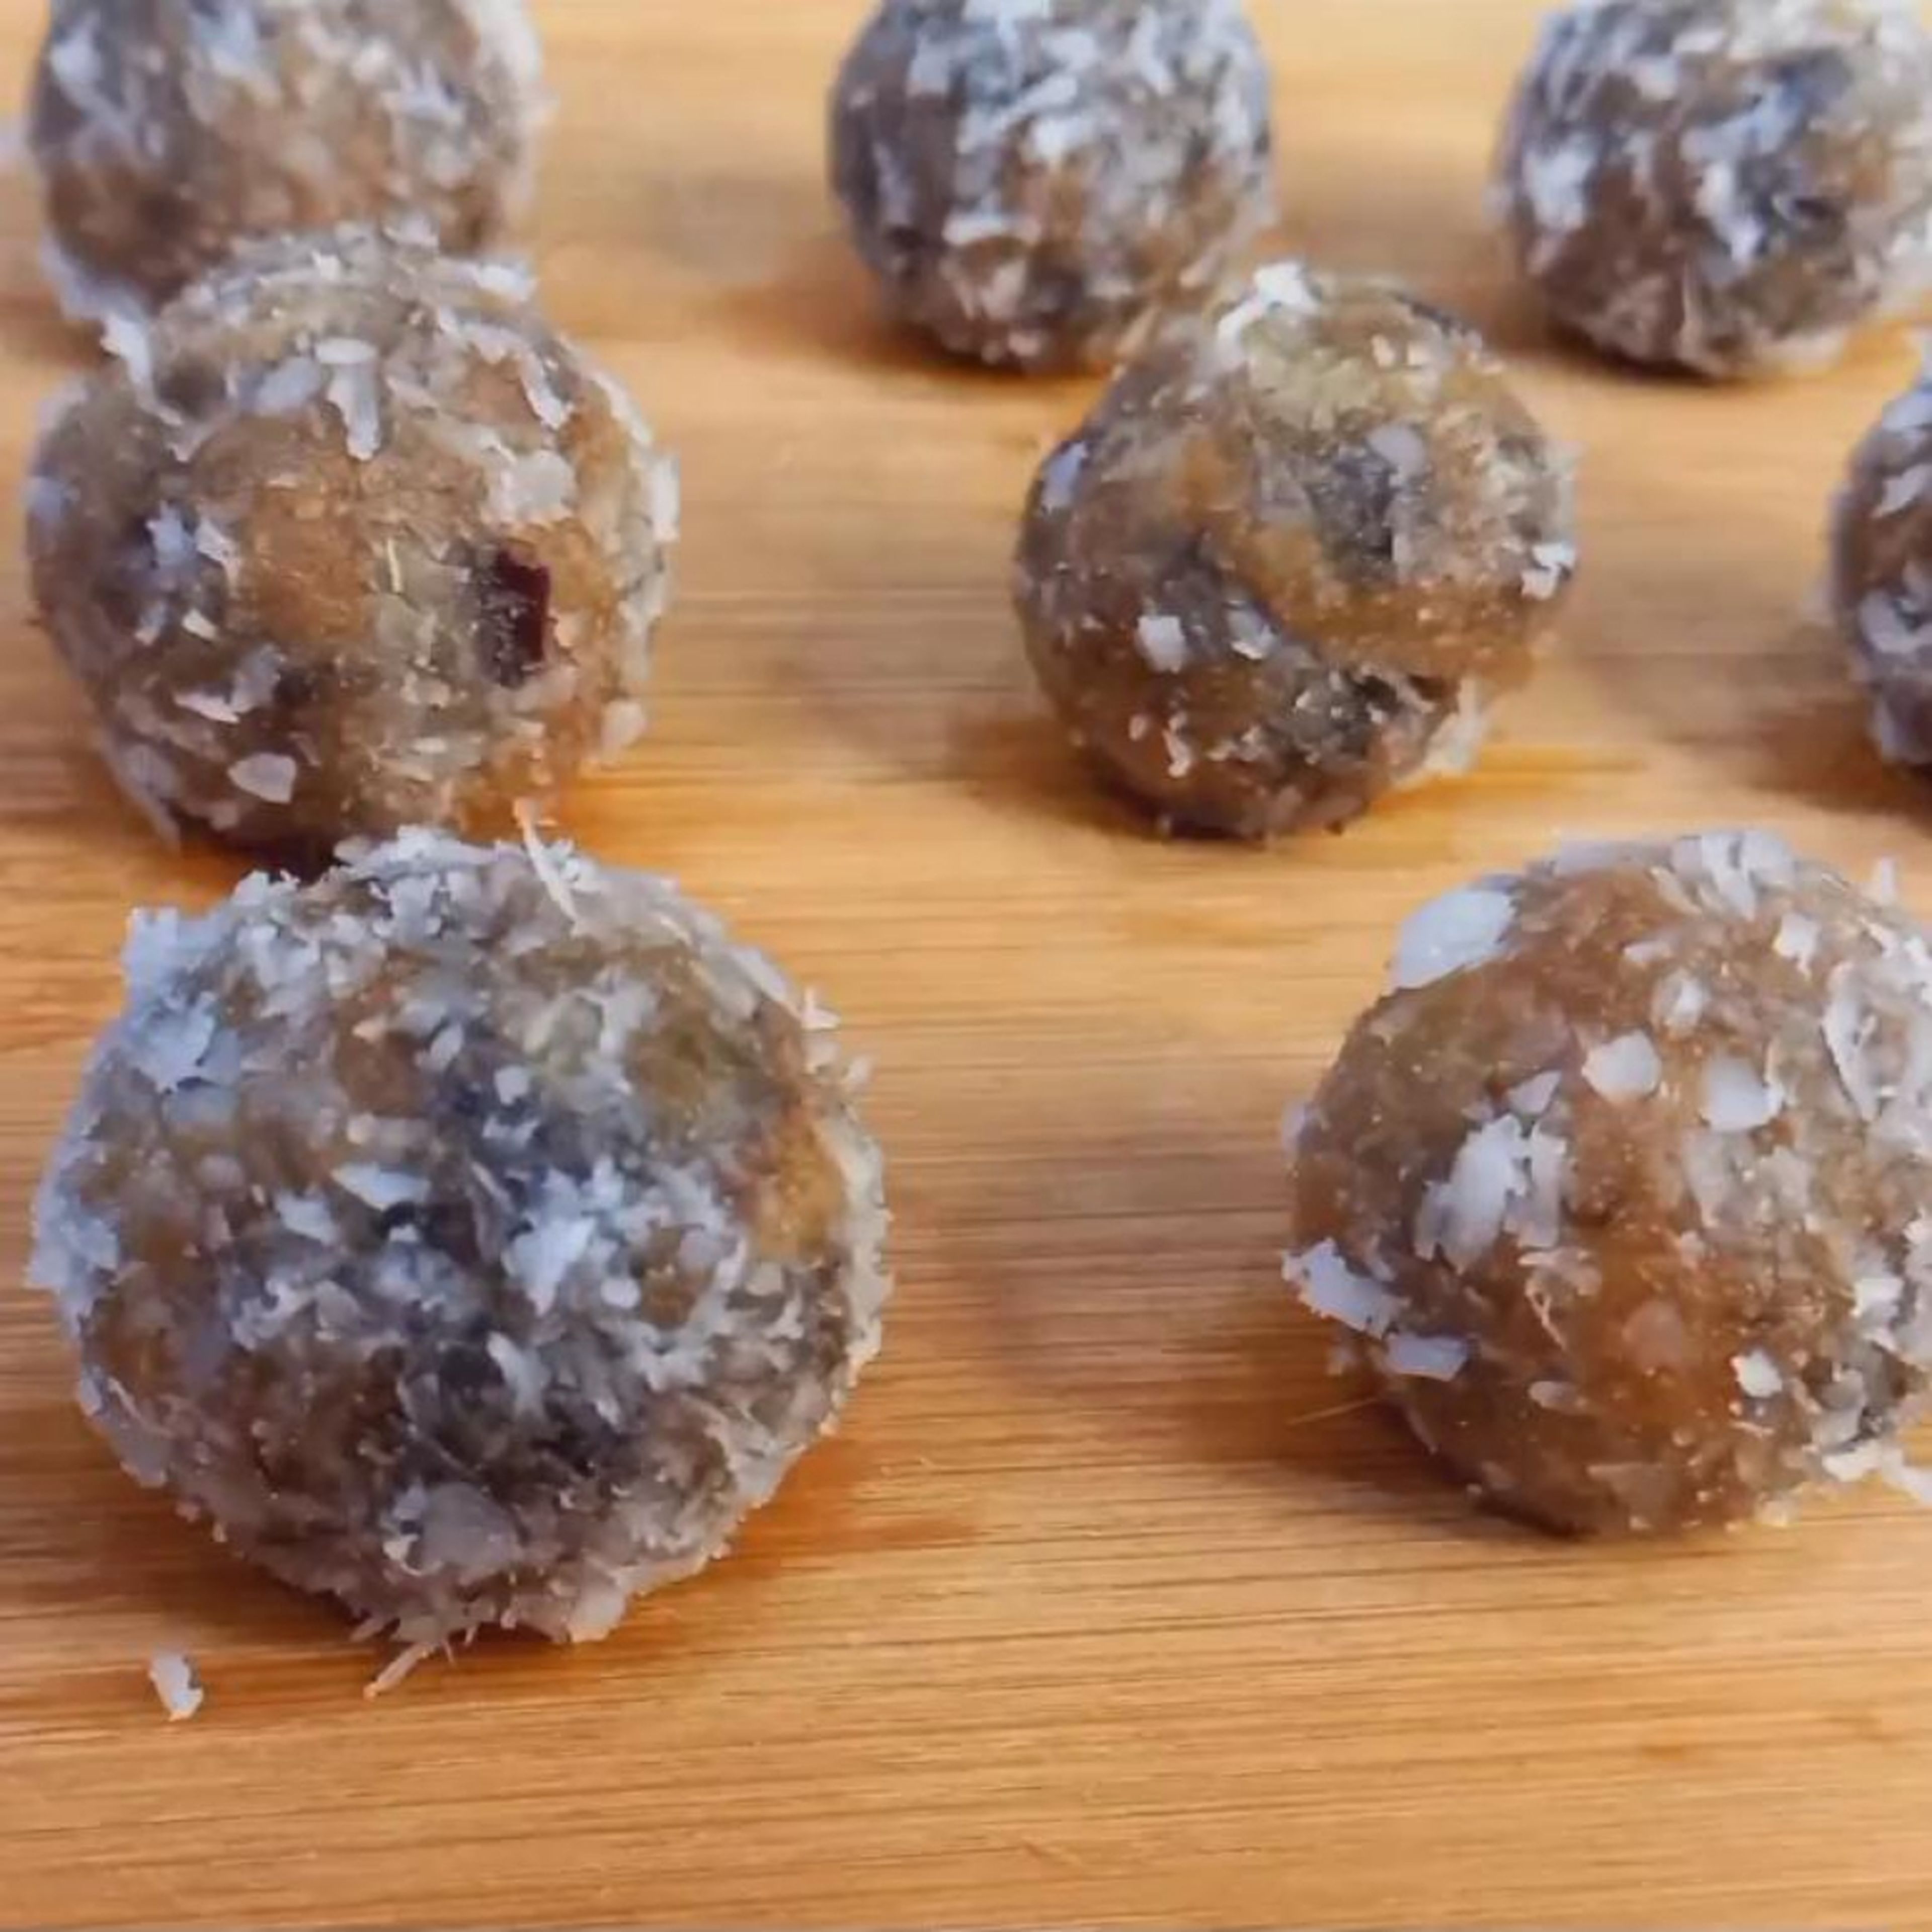 Coconut Date Balls are ready to serve.